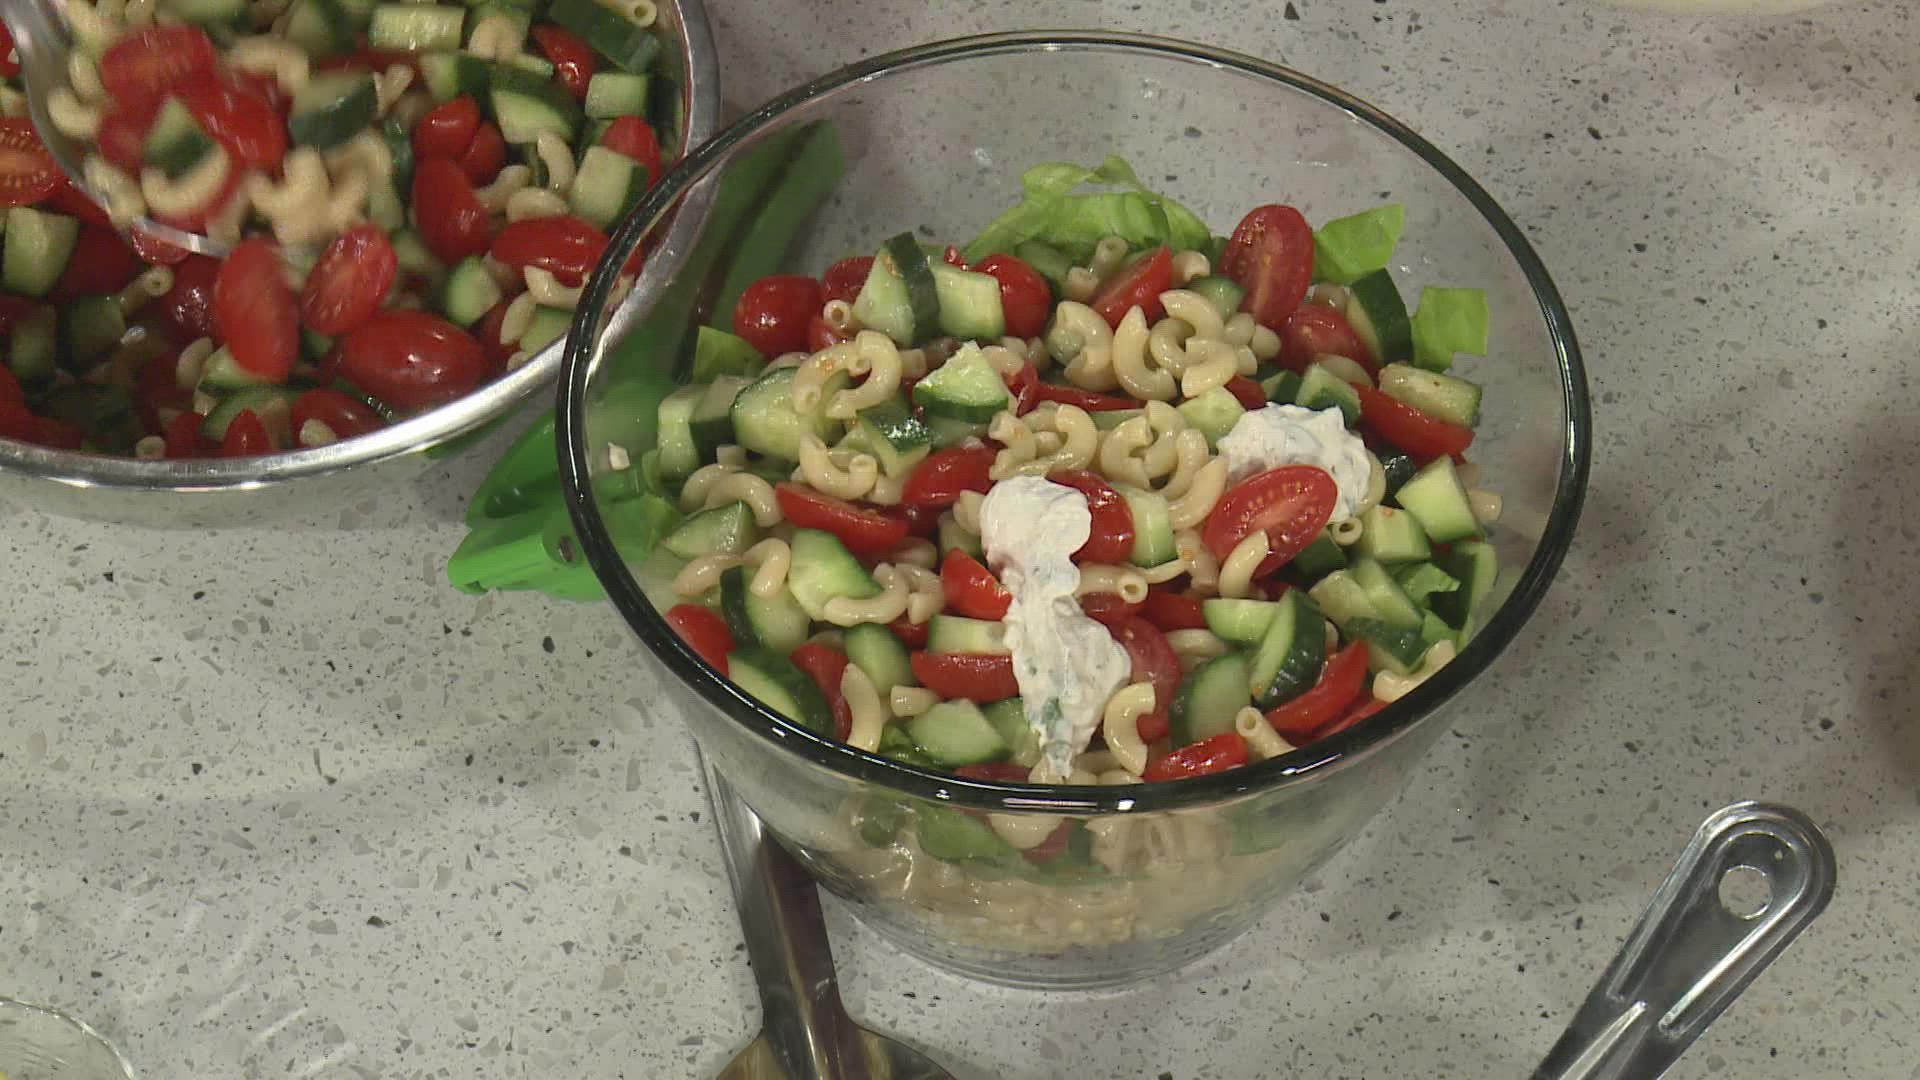 Chef Kevin is going against the winter holiday grain and doing a pasta salad.